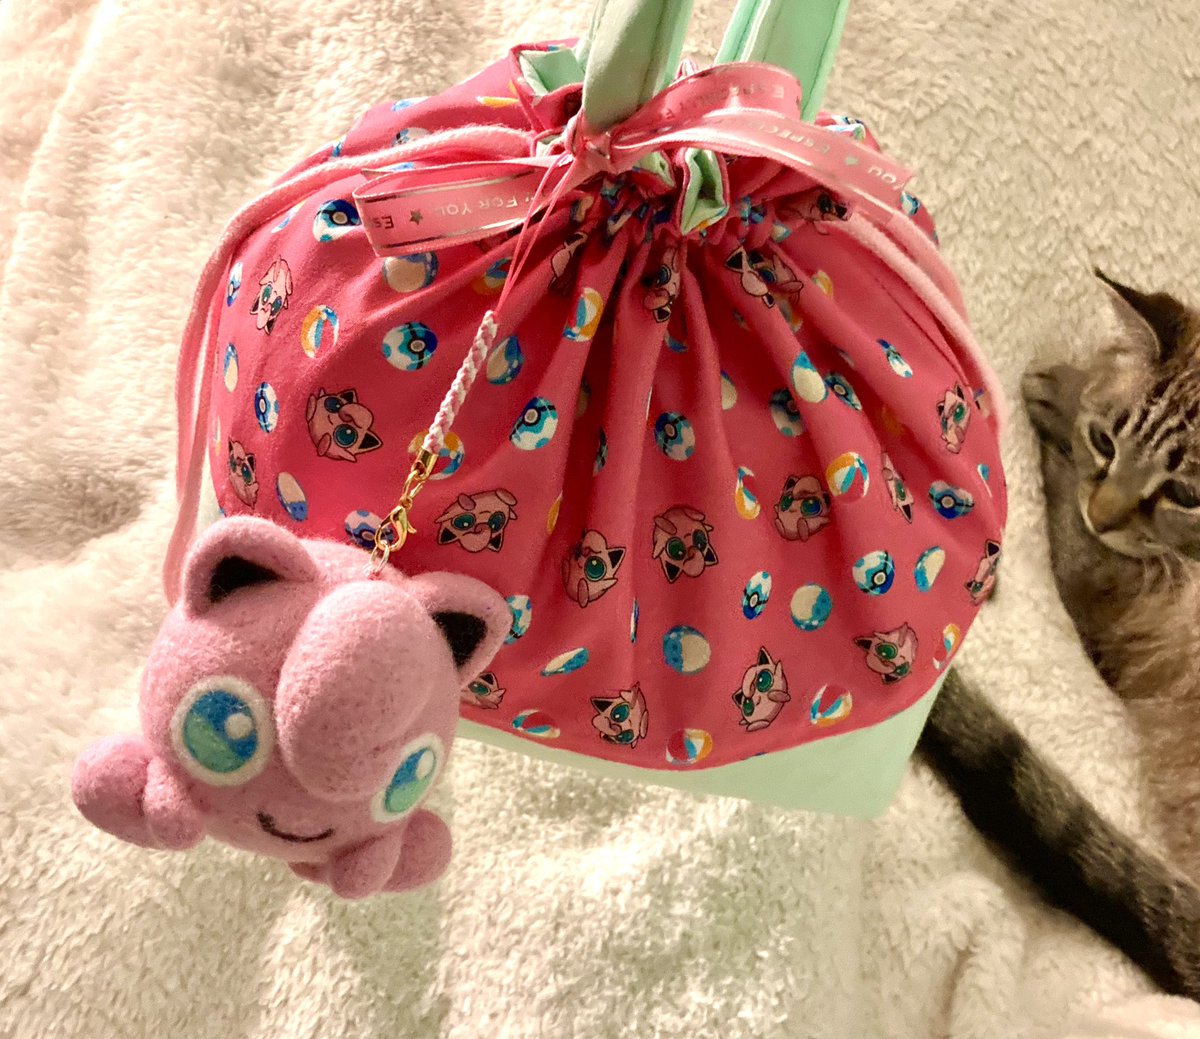 For 2023 Christmas, I needlefelted a jigglypuff charm and slapped together a custom jigglypuff bag for my jigglypuff-loving friend
Was kinda jigglyrough getting it done on time but I managed uwu
#pokemon